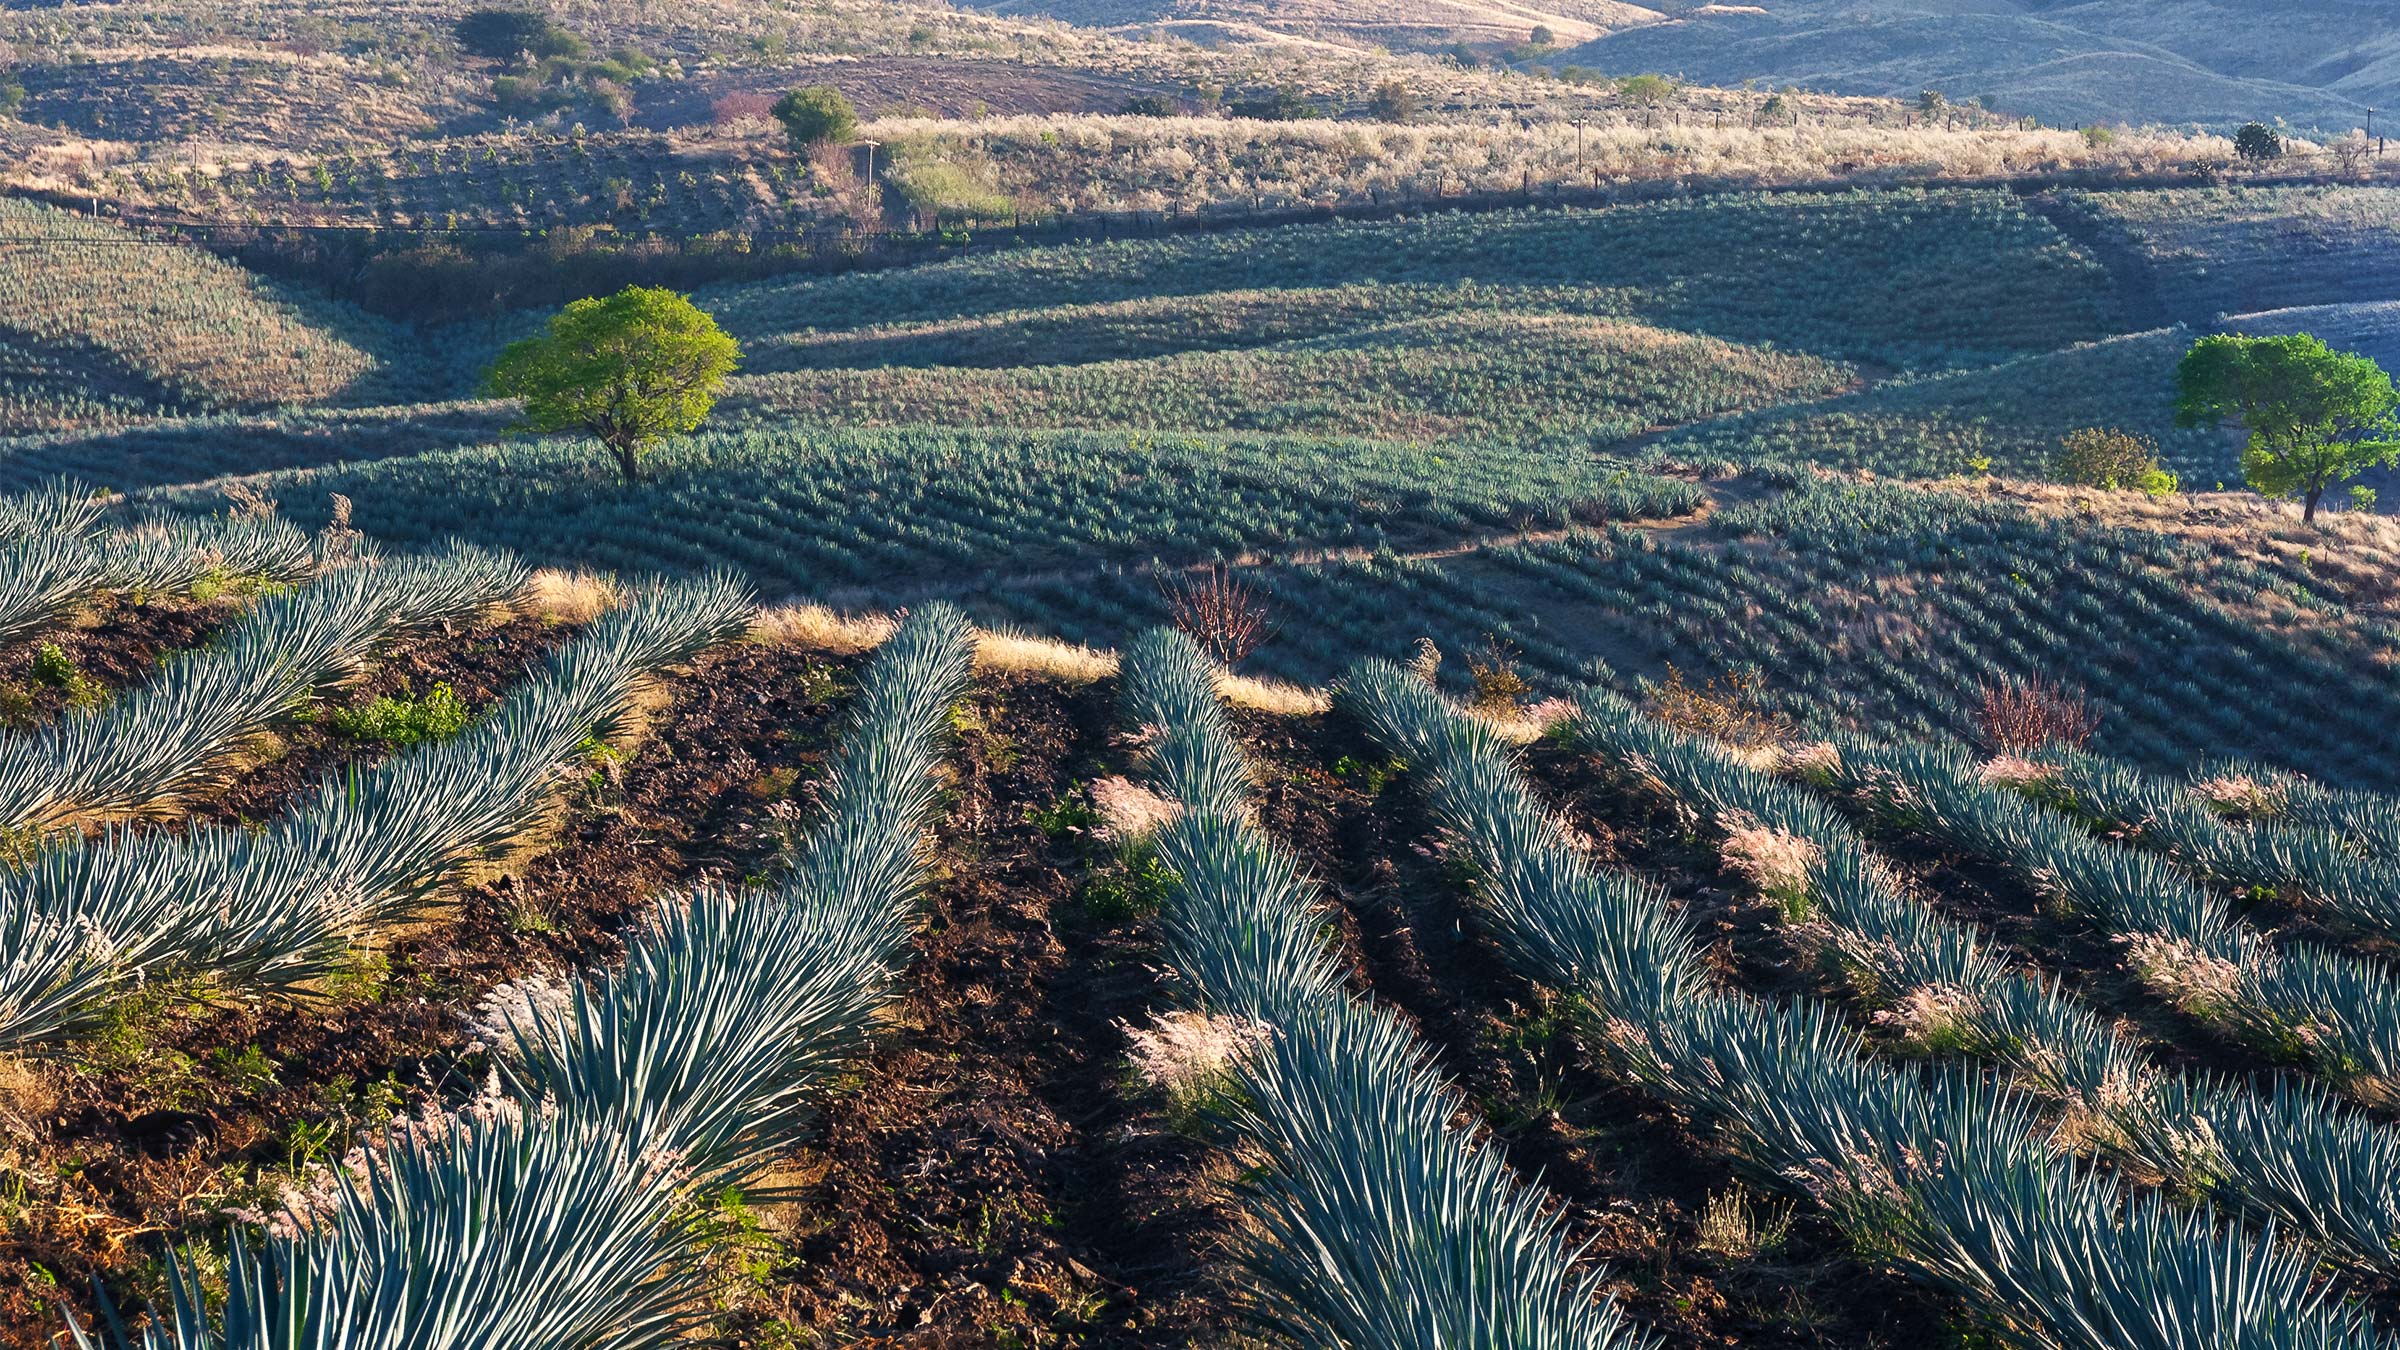 rows of agave plants